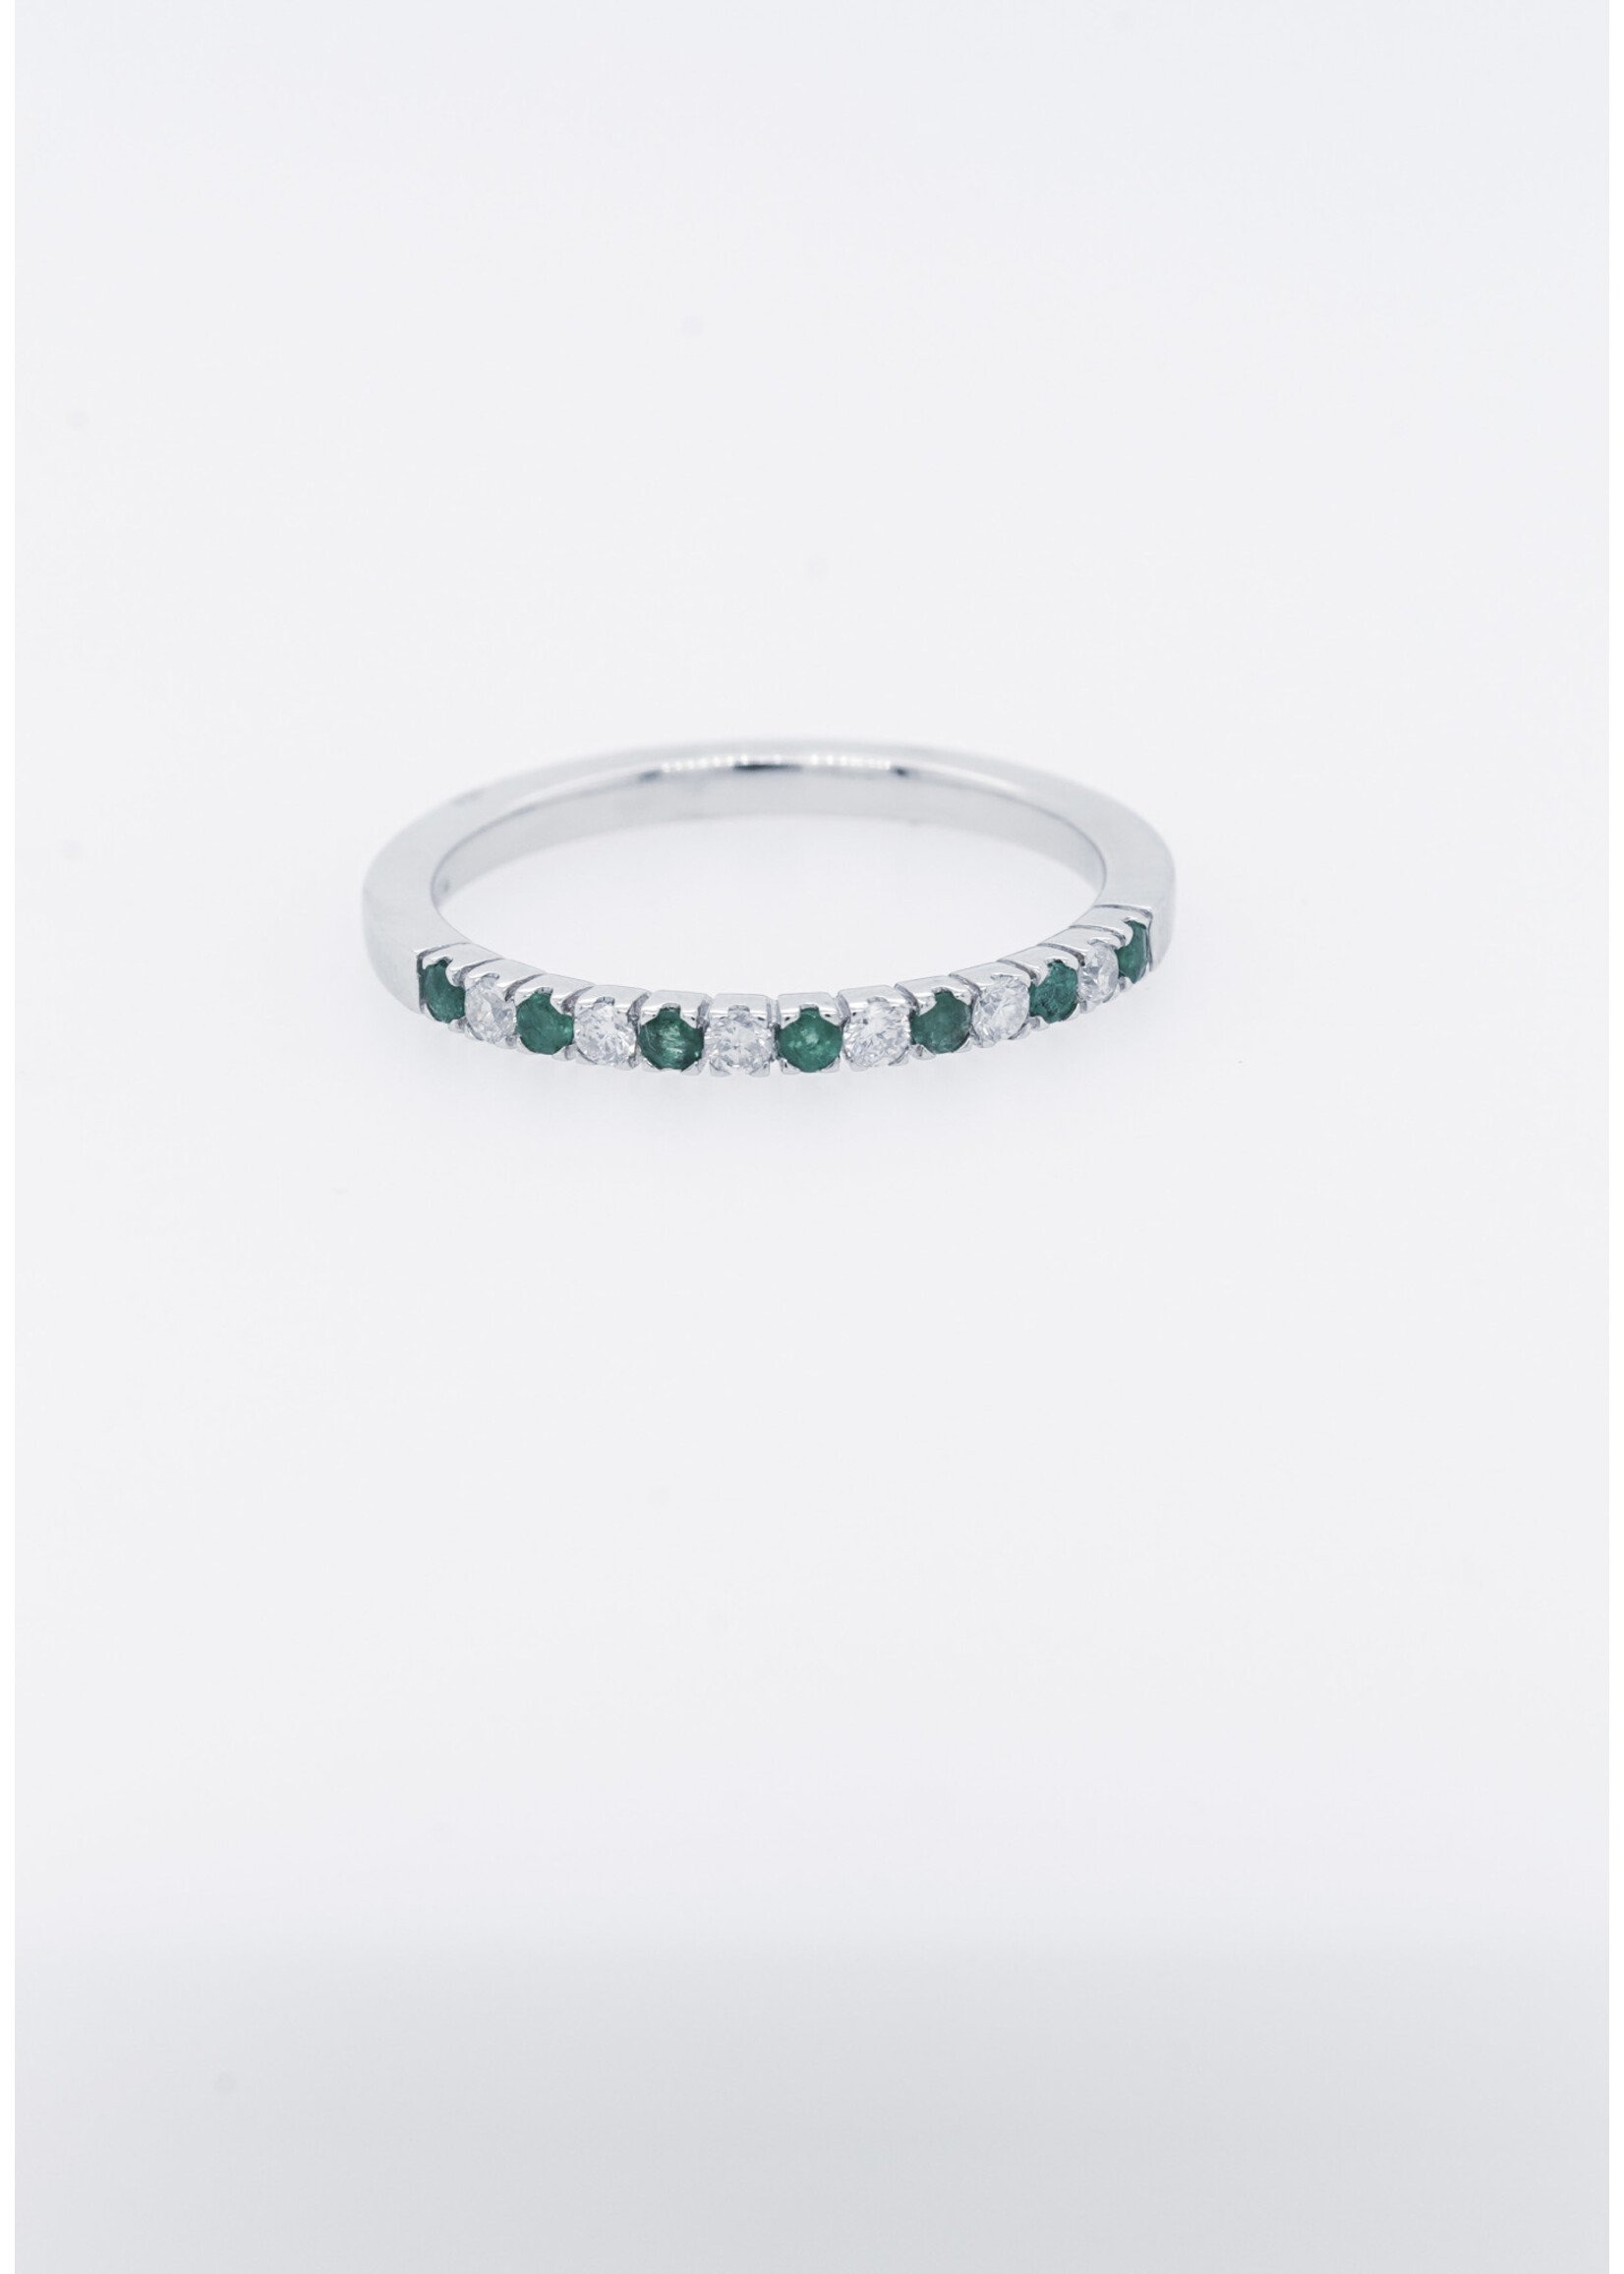 14KW 2.21g .16ctw Diamond .16ctw Emerald Stackable Band (size 7)